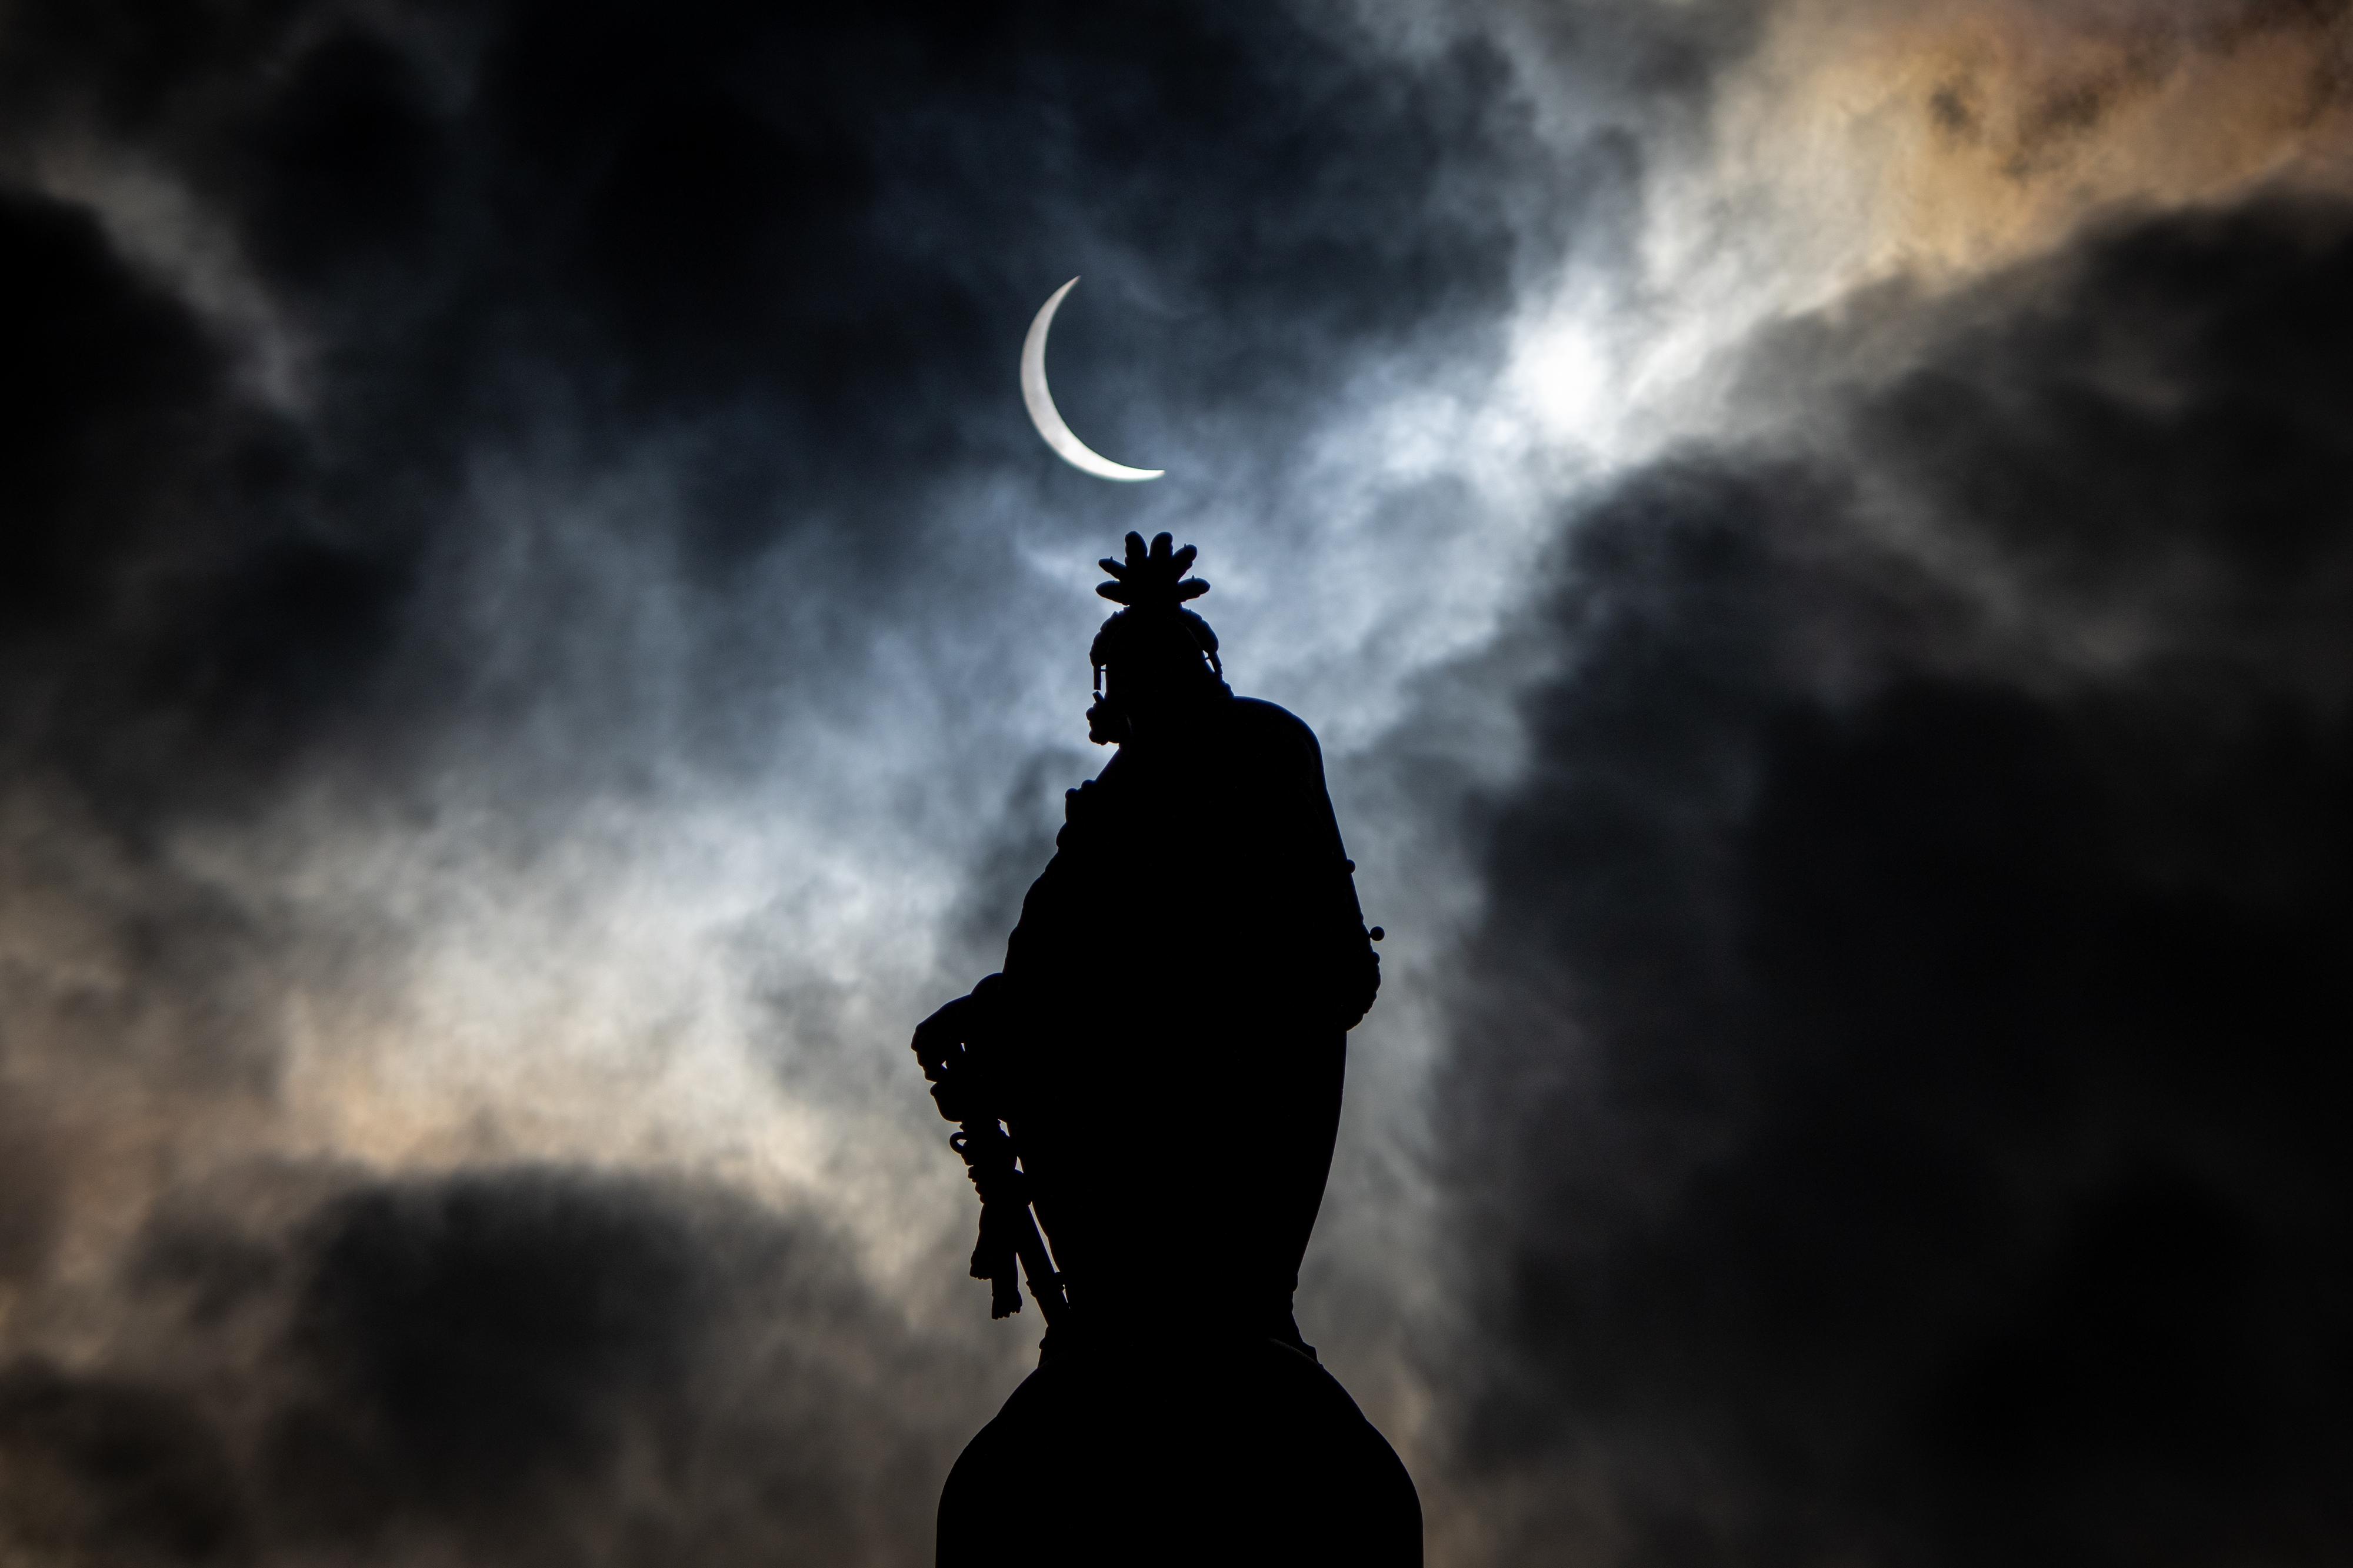 Silhouette of a statue against the night sky with a crescent moon above